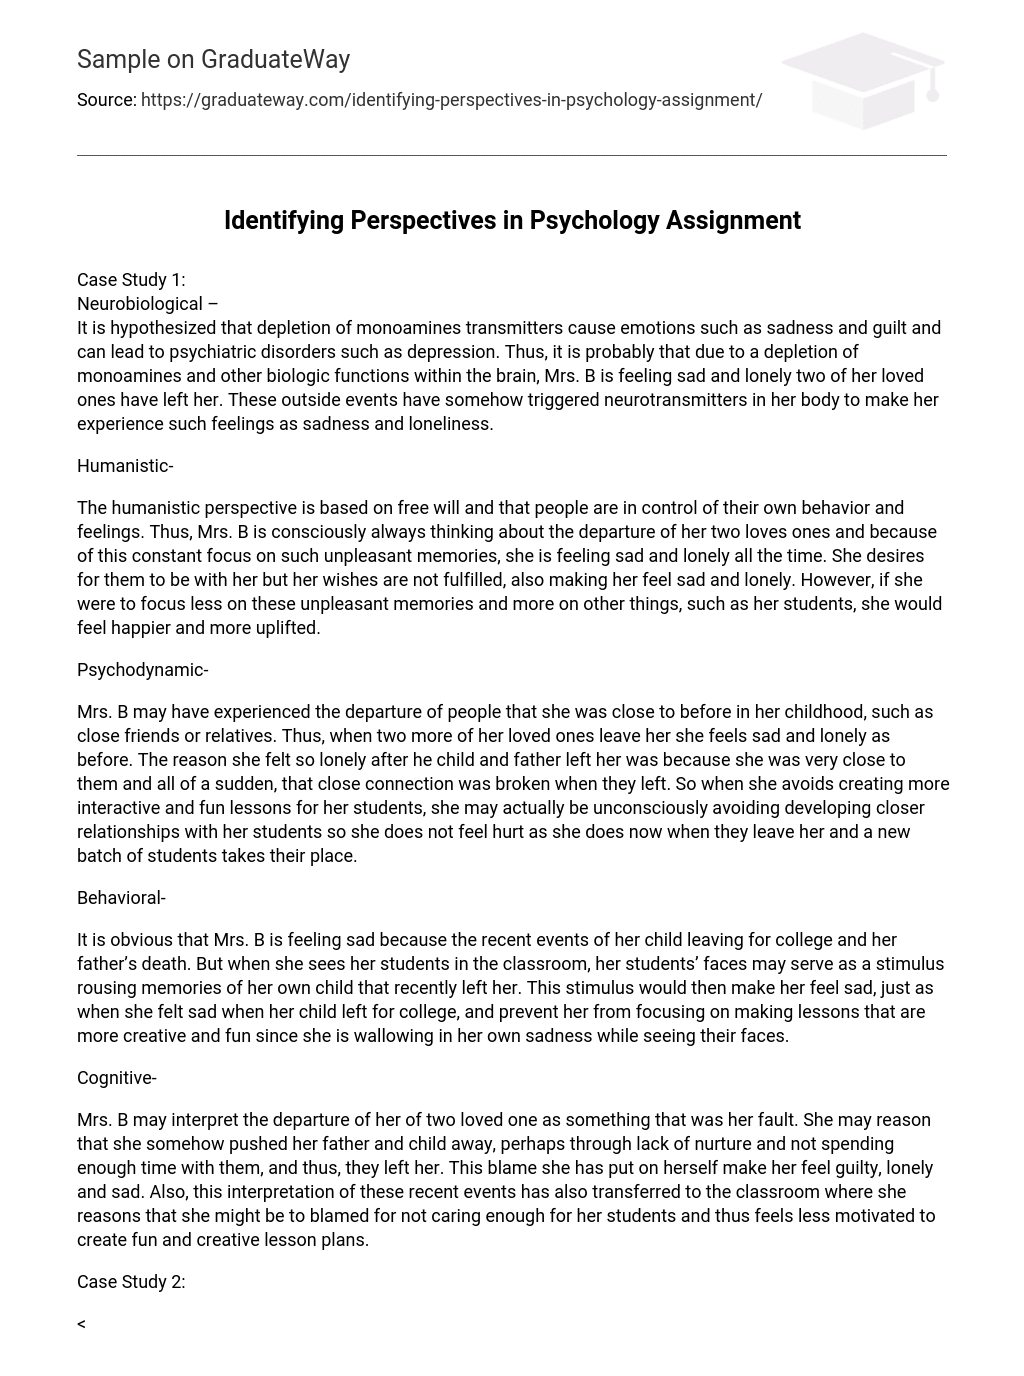 Identifying Perspectives in Psychology Assignment